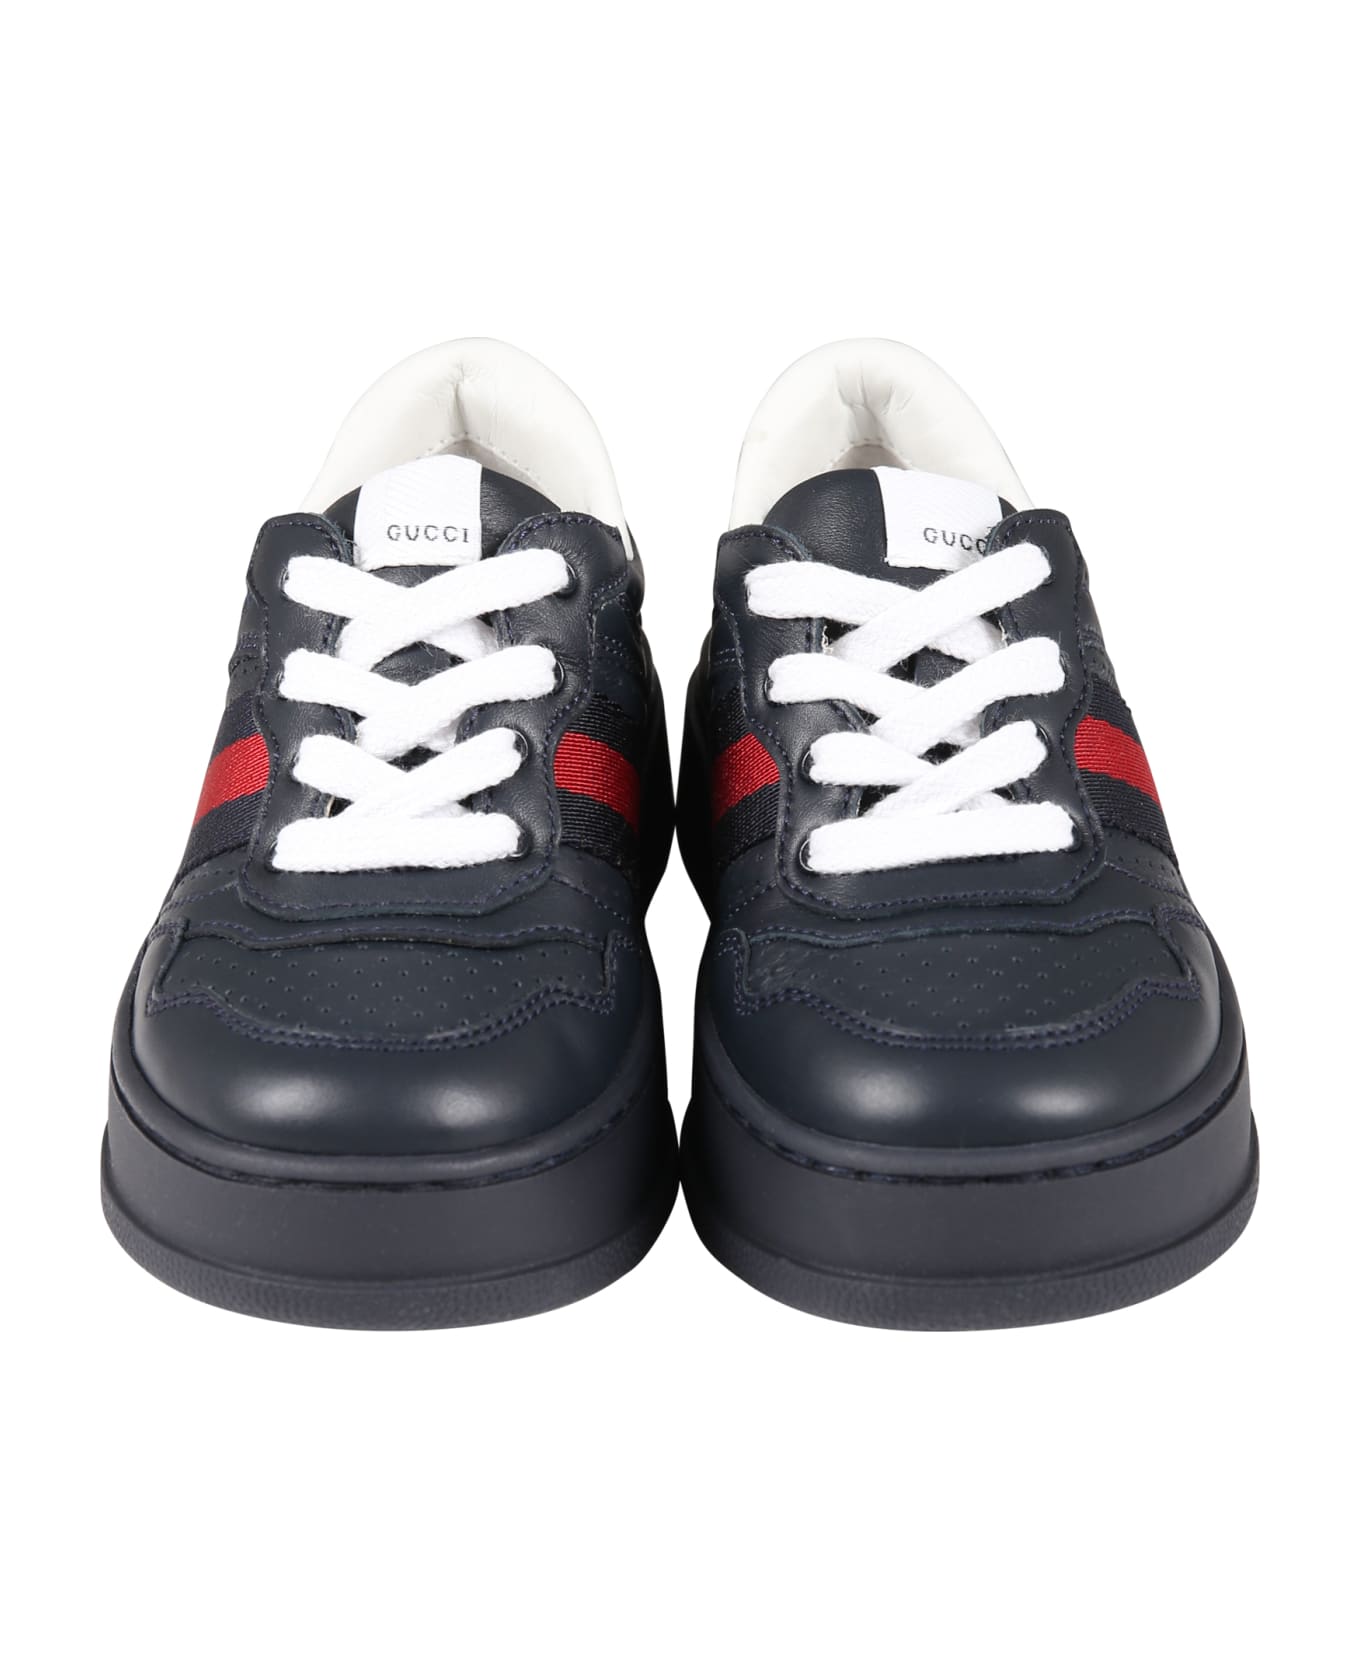 Gucci Blue Sneakers For Boy With Web - Blue